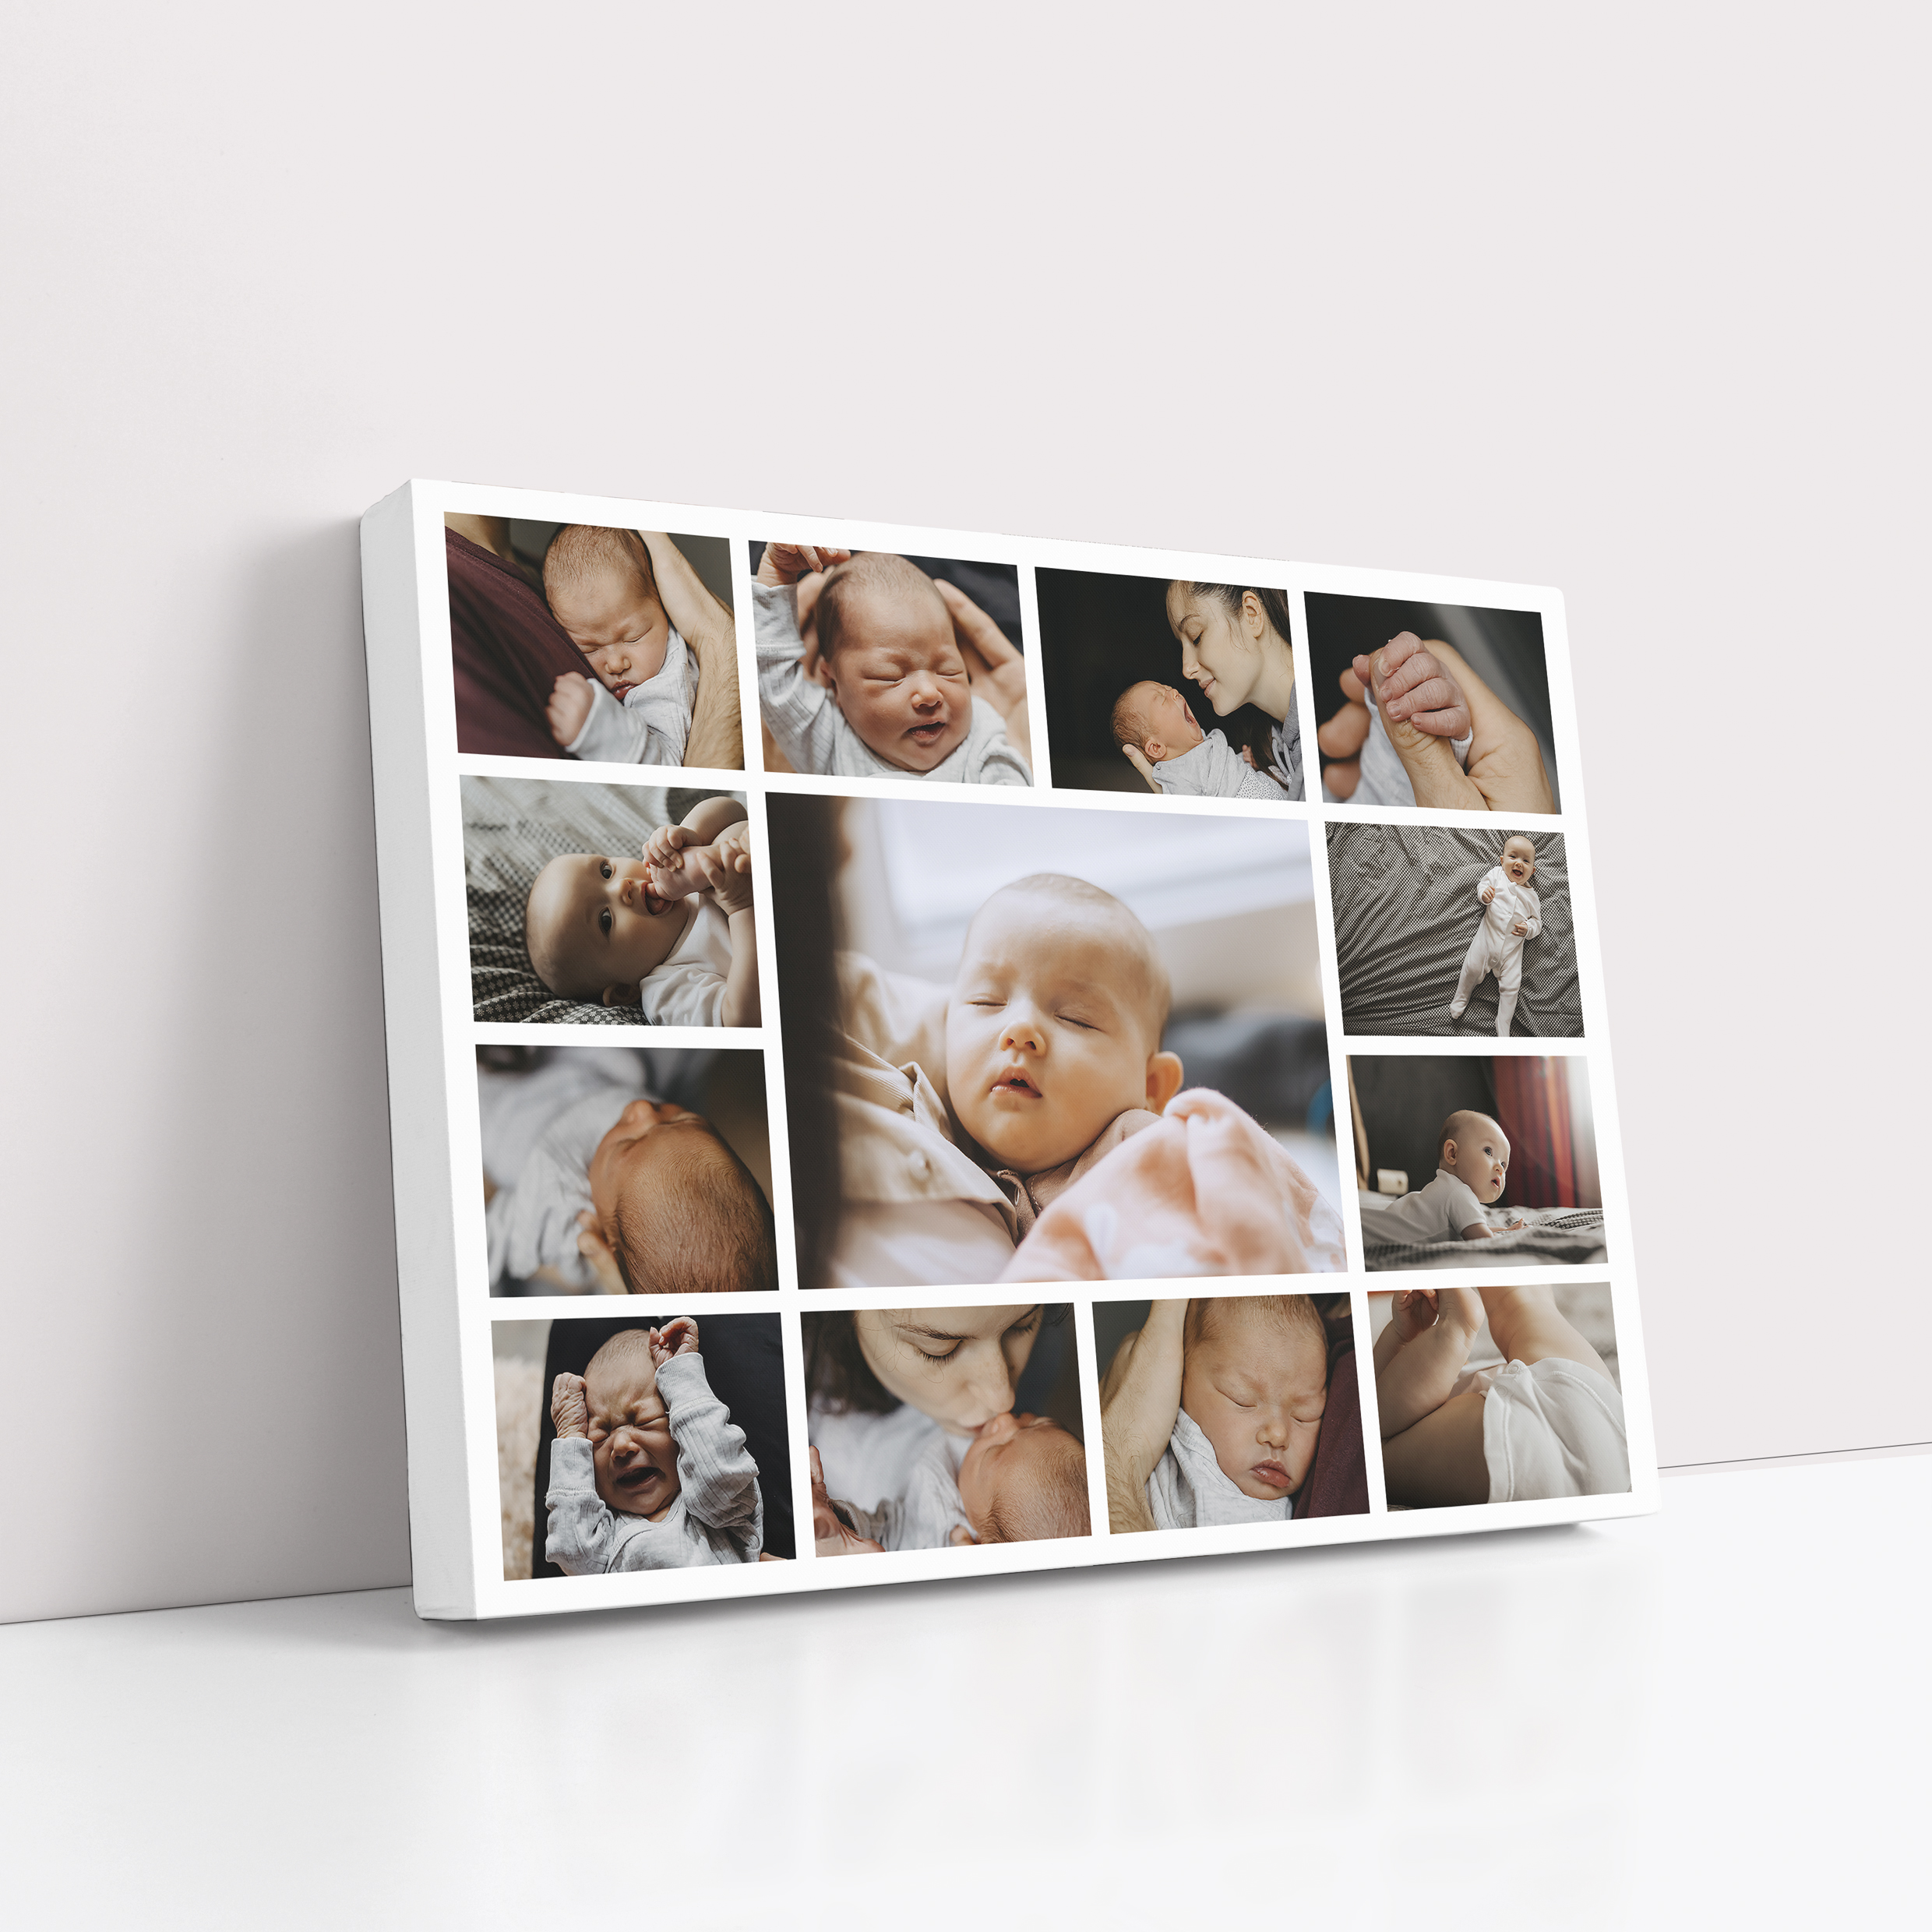  Personalized Life's Collage Stretch Canvas Print - Showcase 10+ Cherished Photos